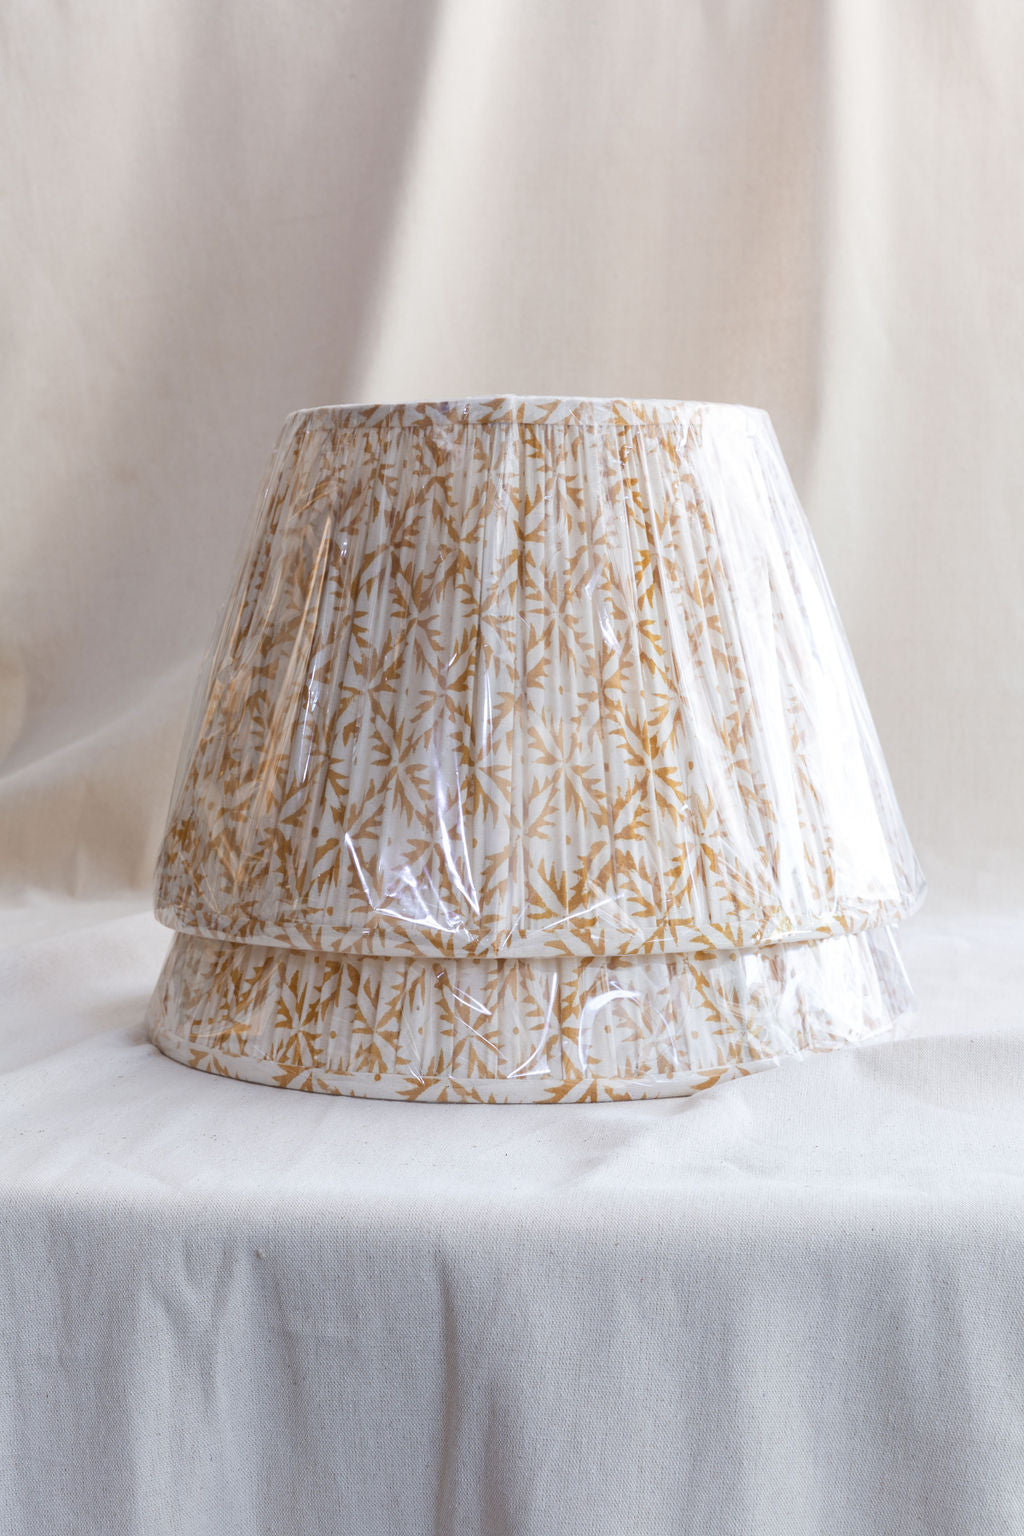 Gathered Golden Lampshade